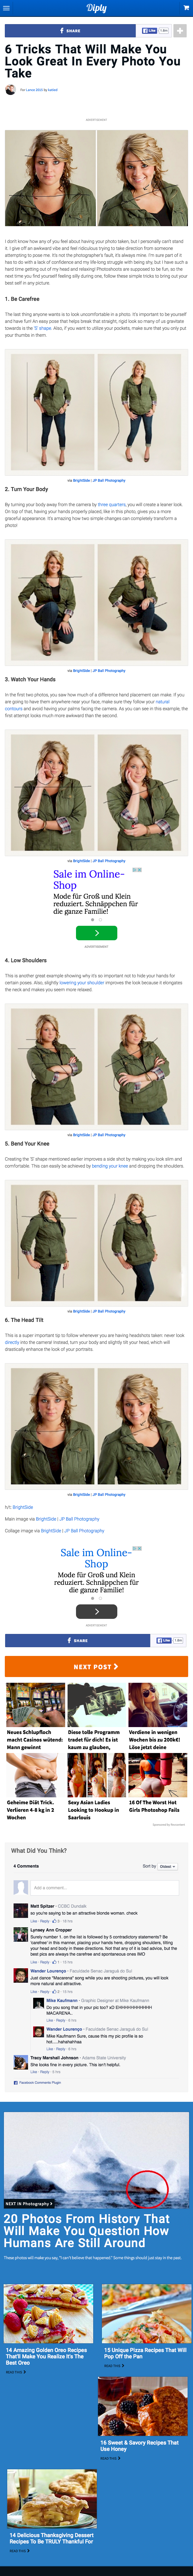 /static/static/blog/http---diply.com-lance2015-article-tricks-that-will-make-you-look-great-in-every-photo.png